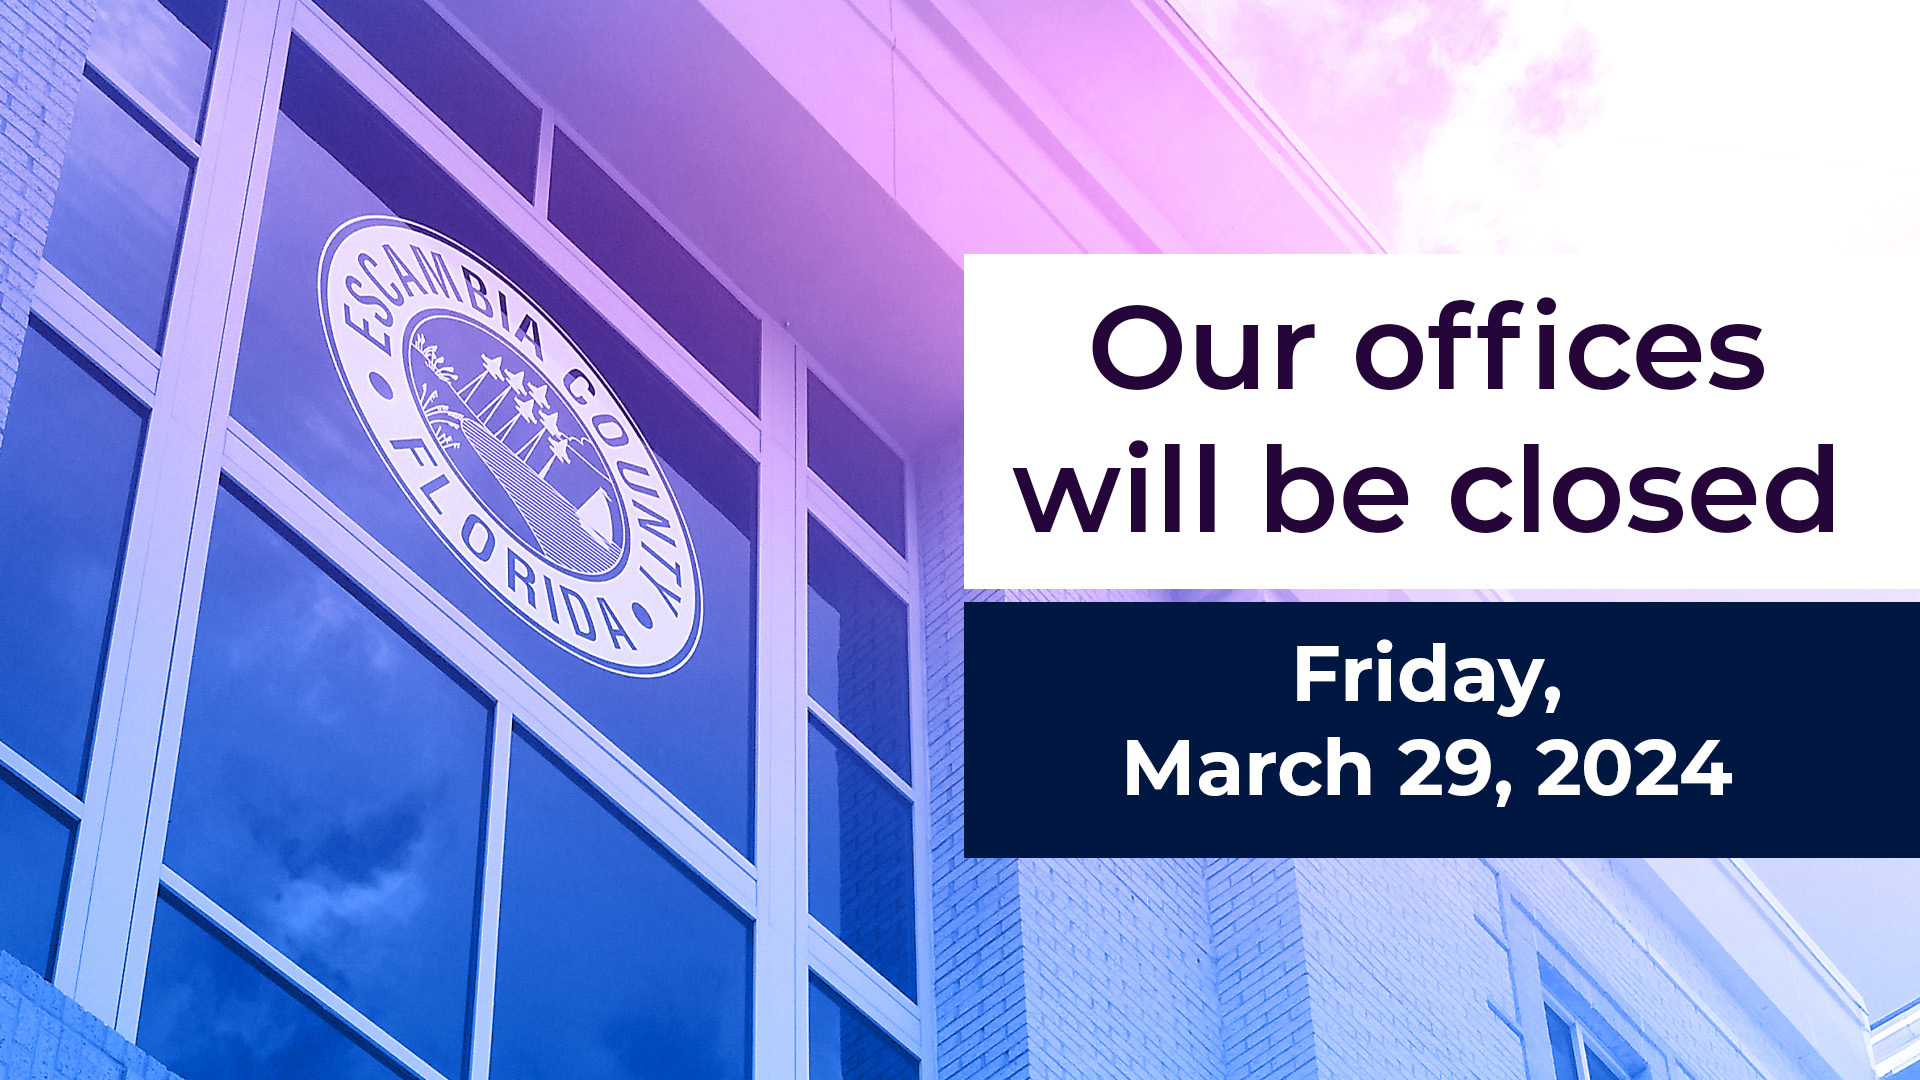 Escambia County offices will be closed for Good Friday March 29, 2024